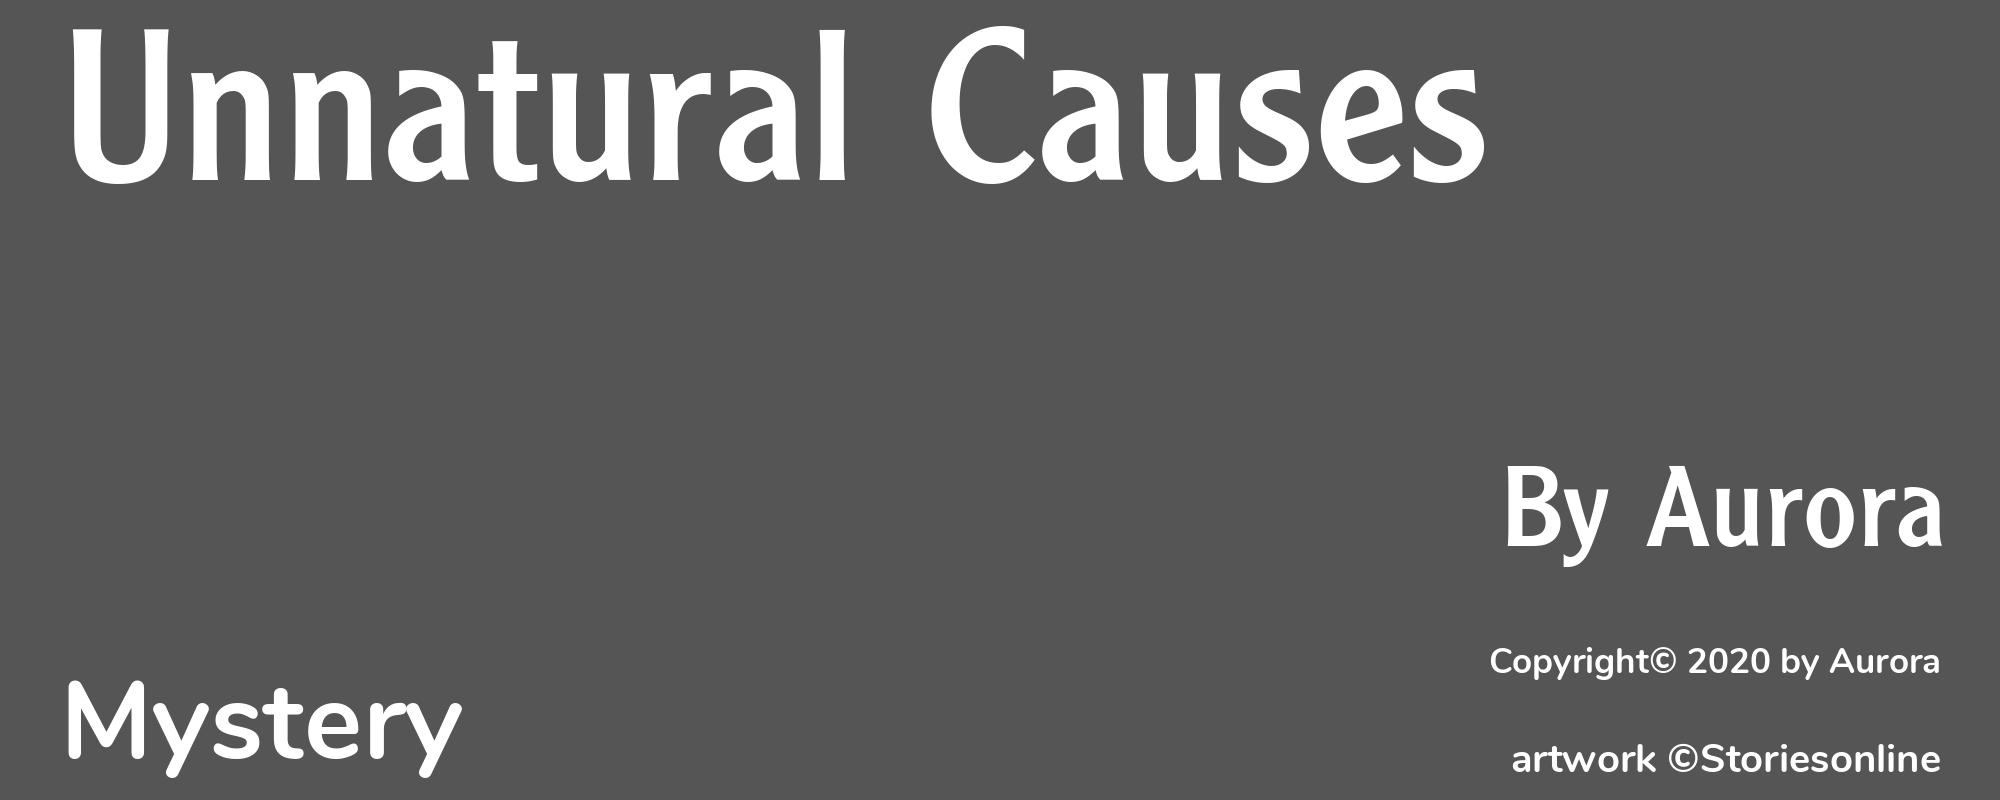 Unnatural Causes - Cover